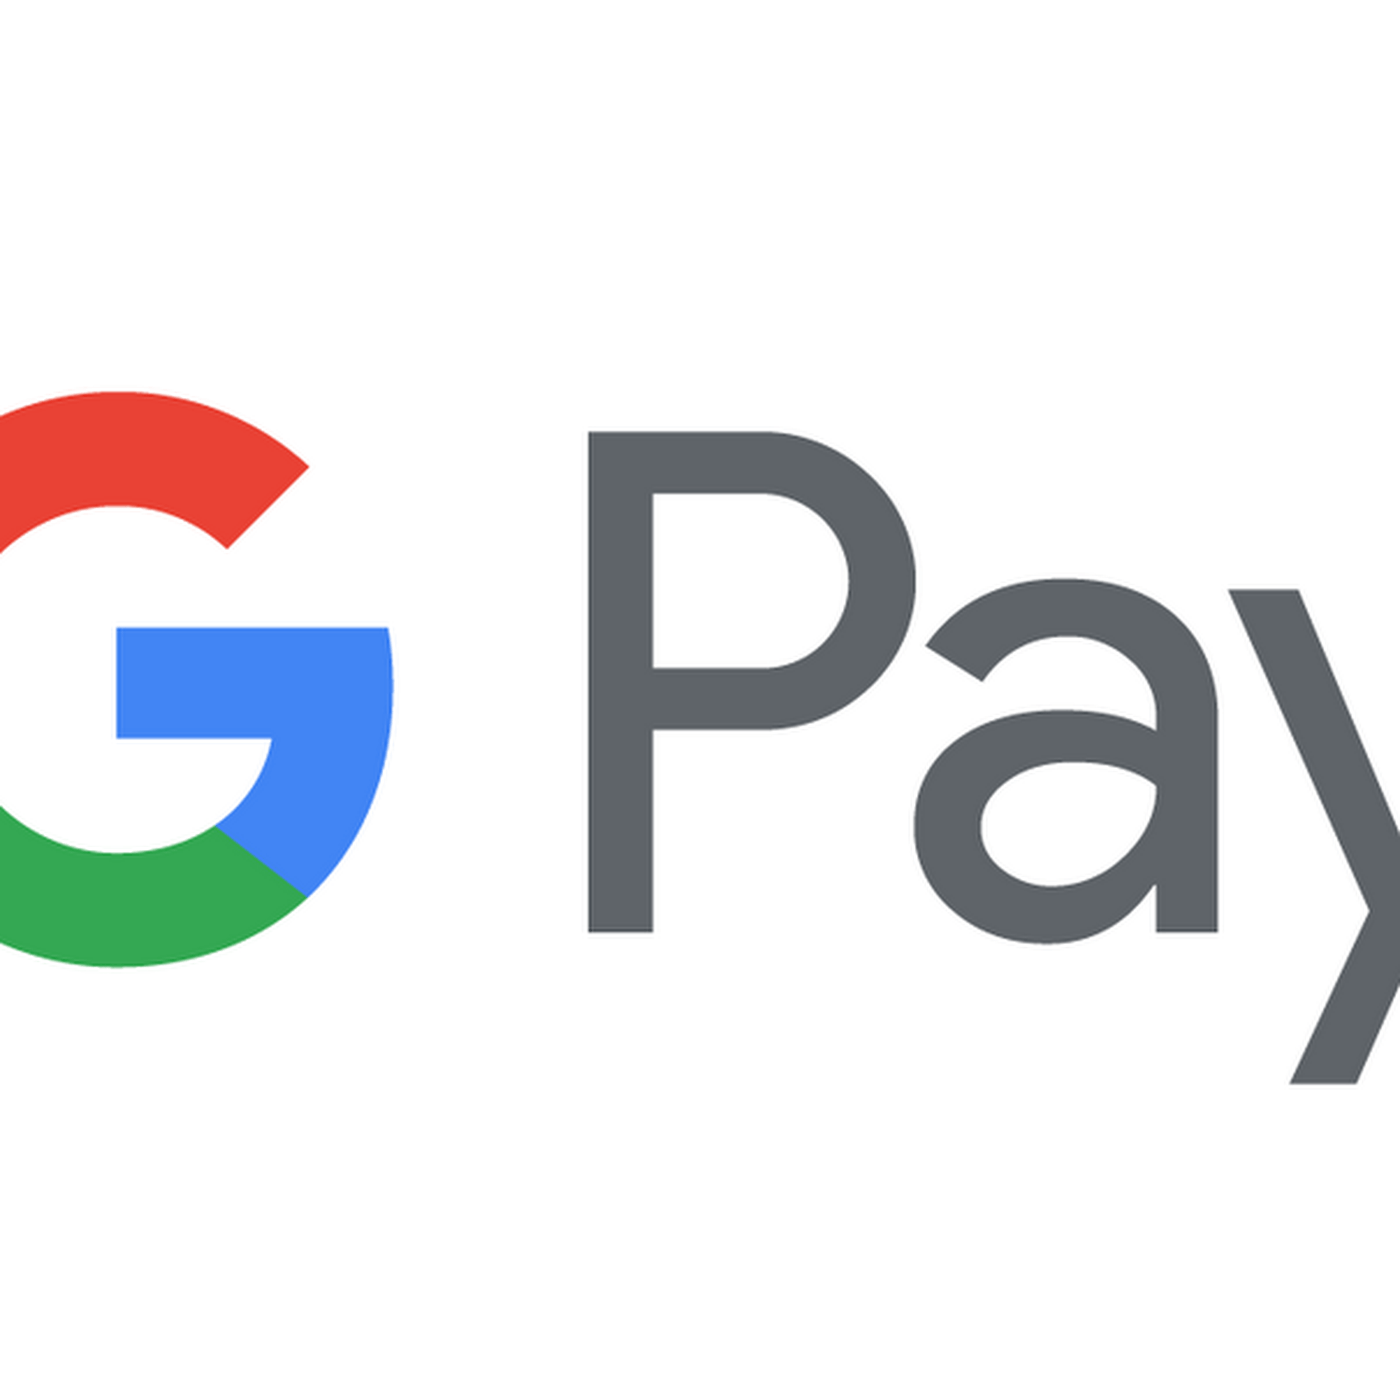 Android Pay Logo - Google is combining Android Pay and Google Wallet into one service